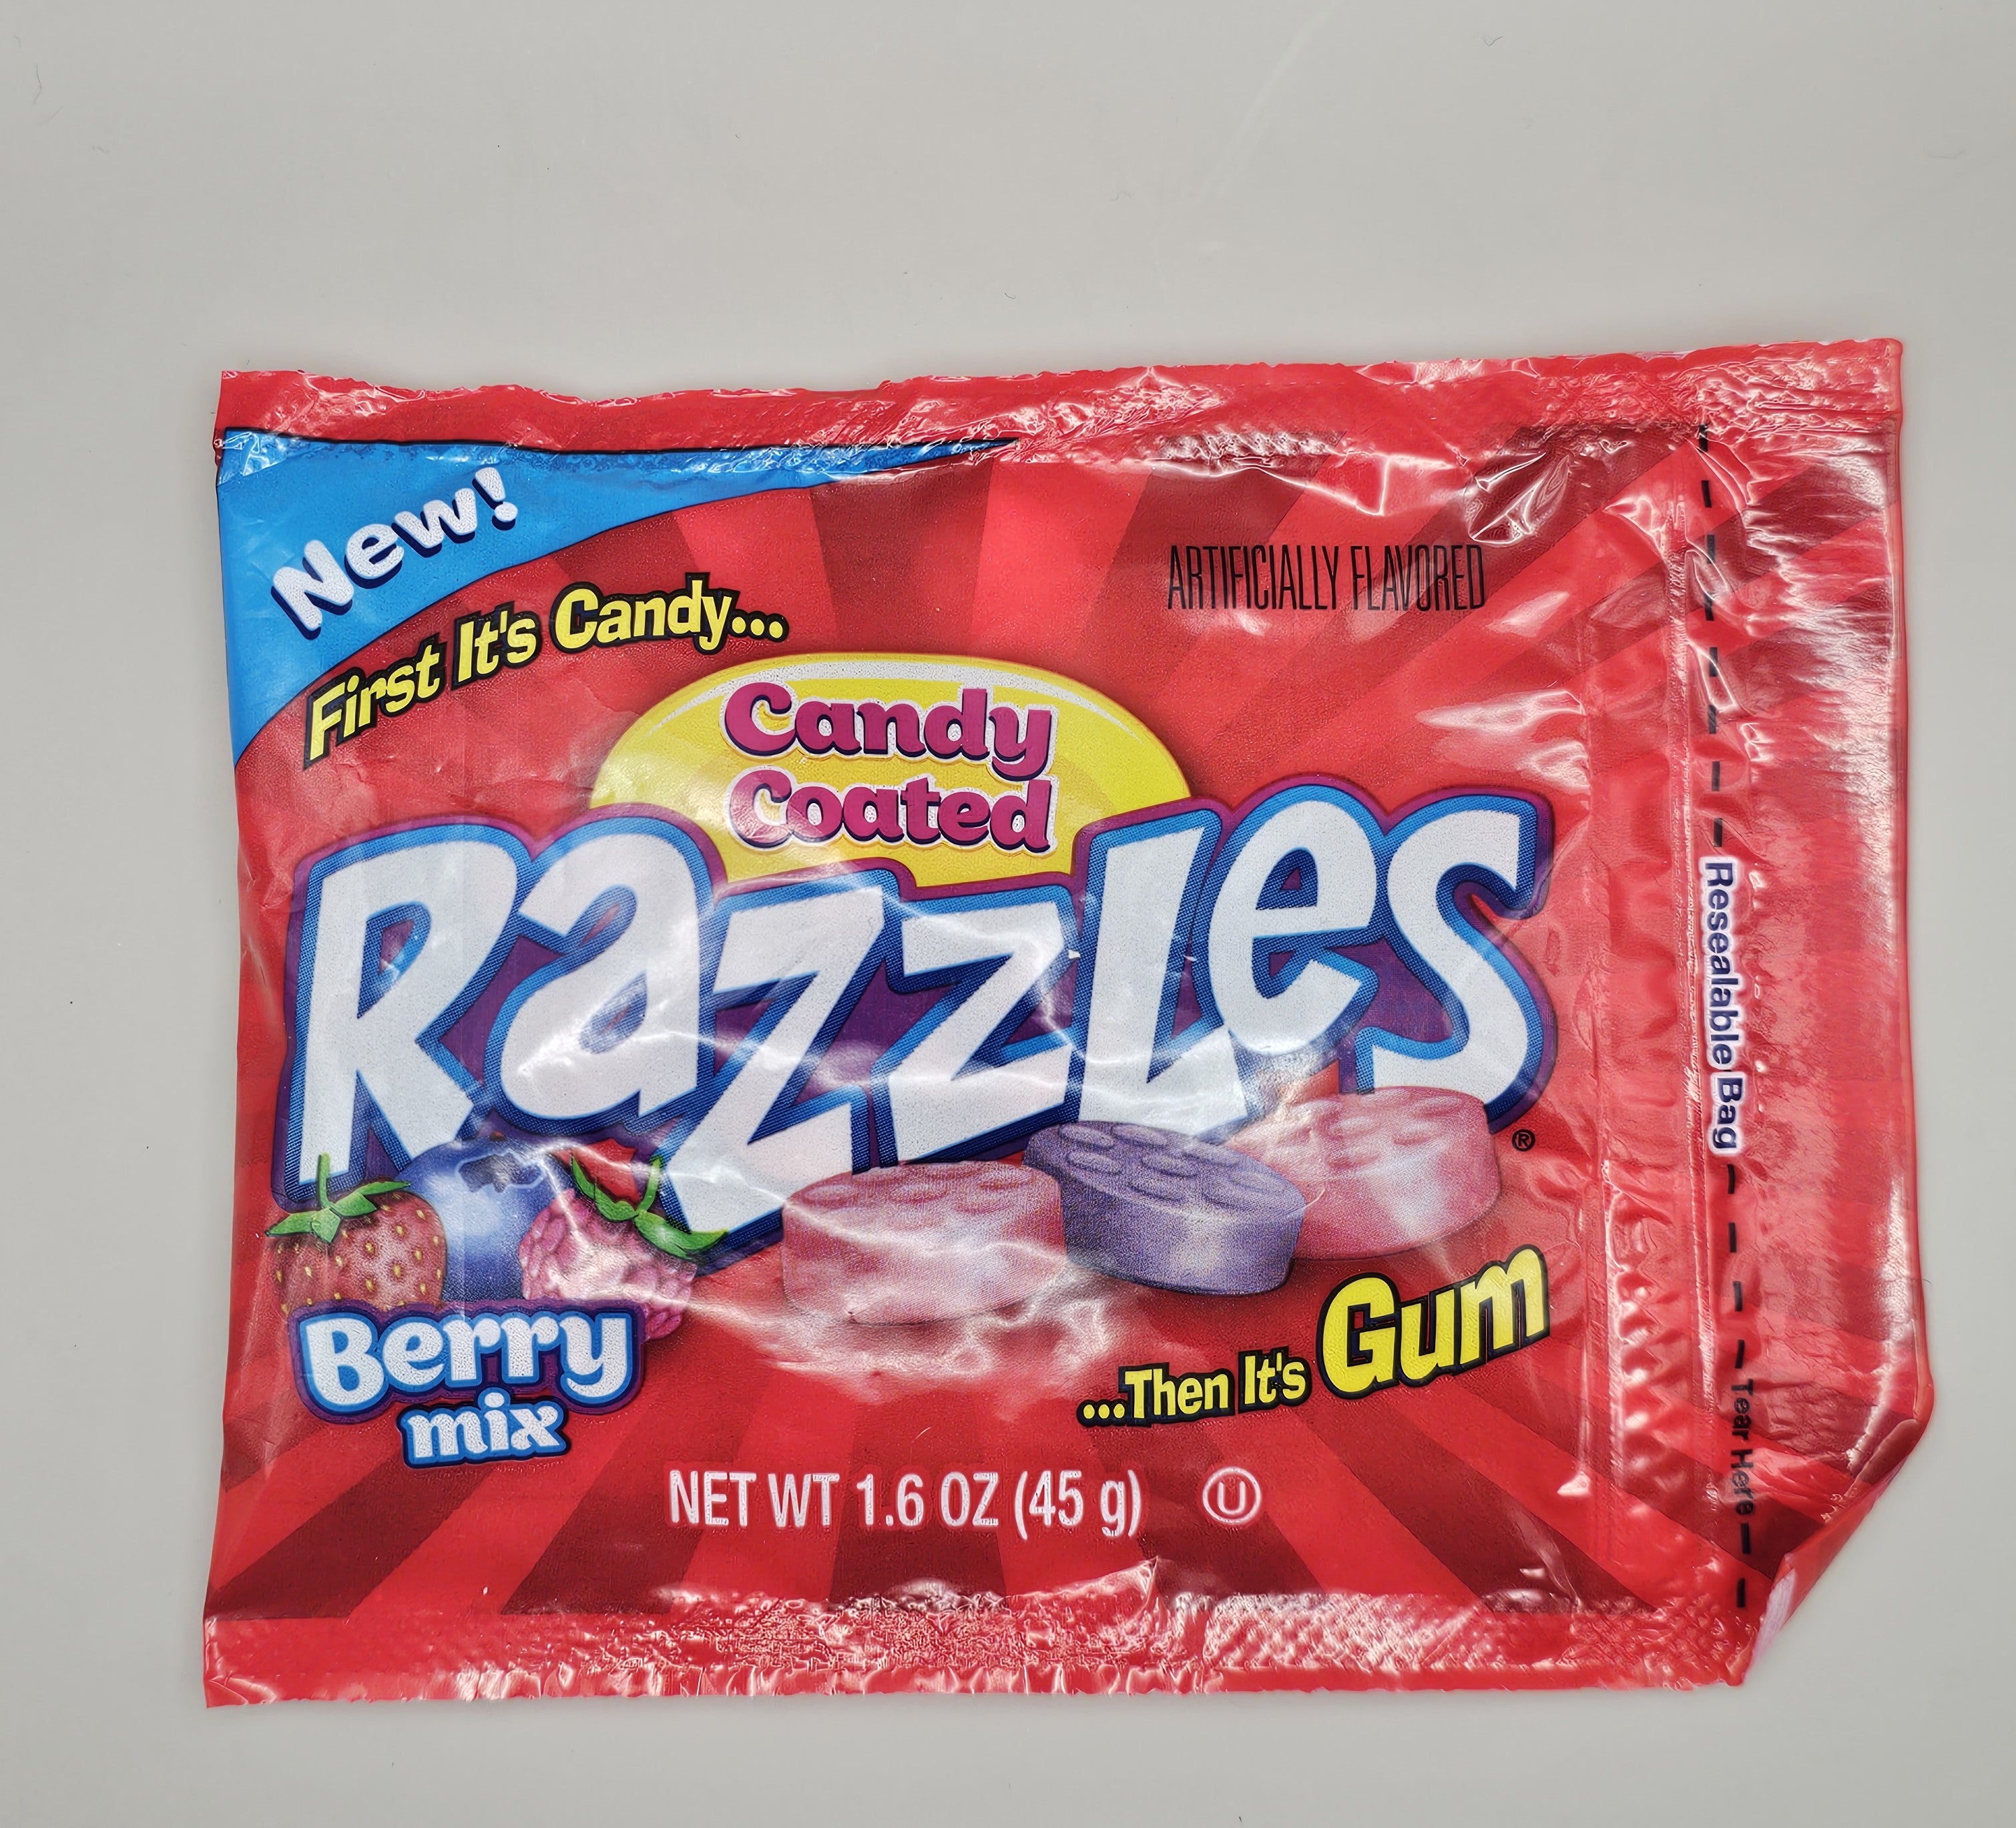 Candy coated razzles.